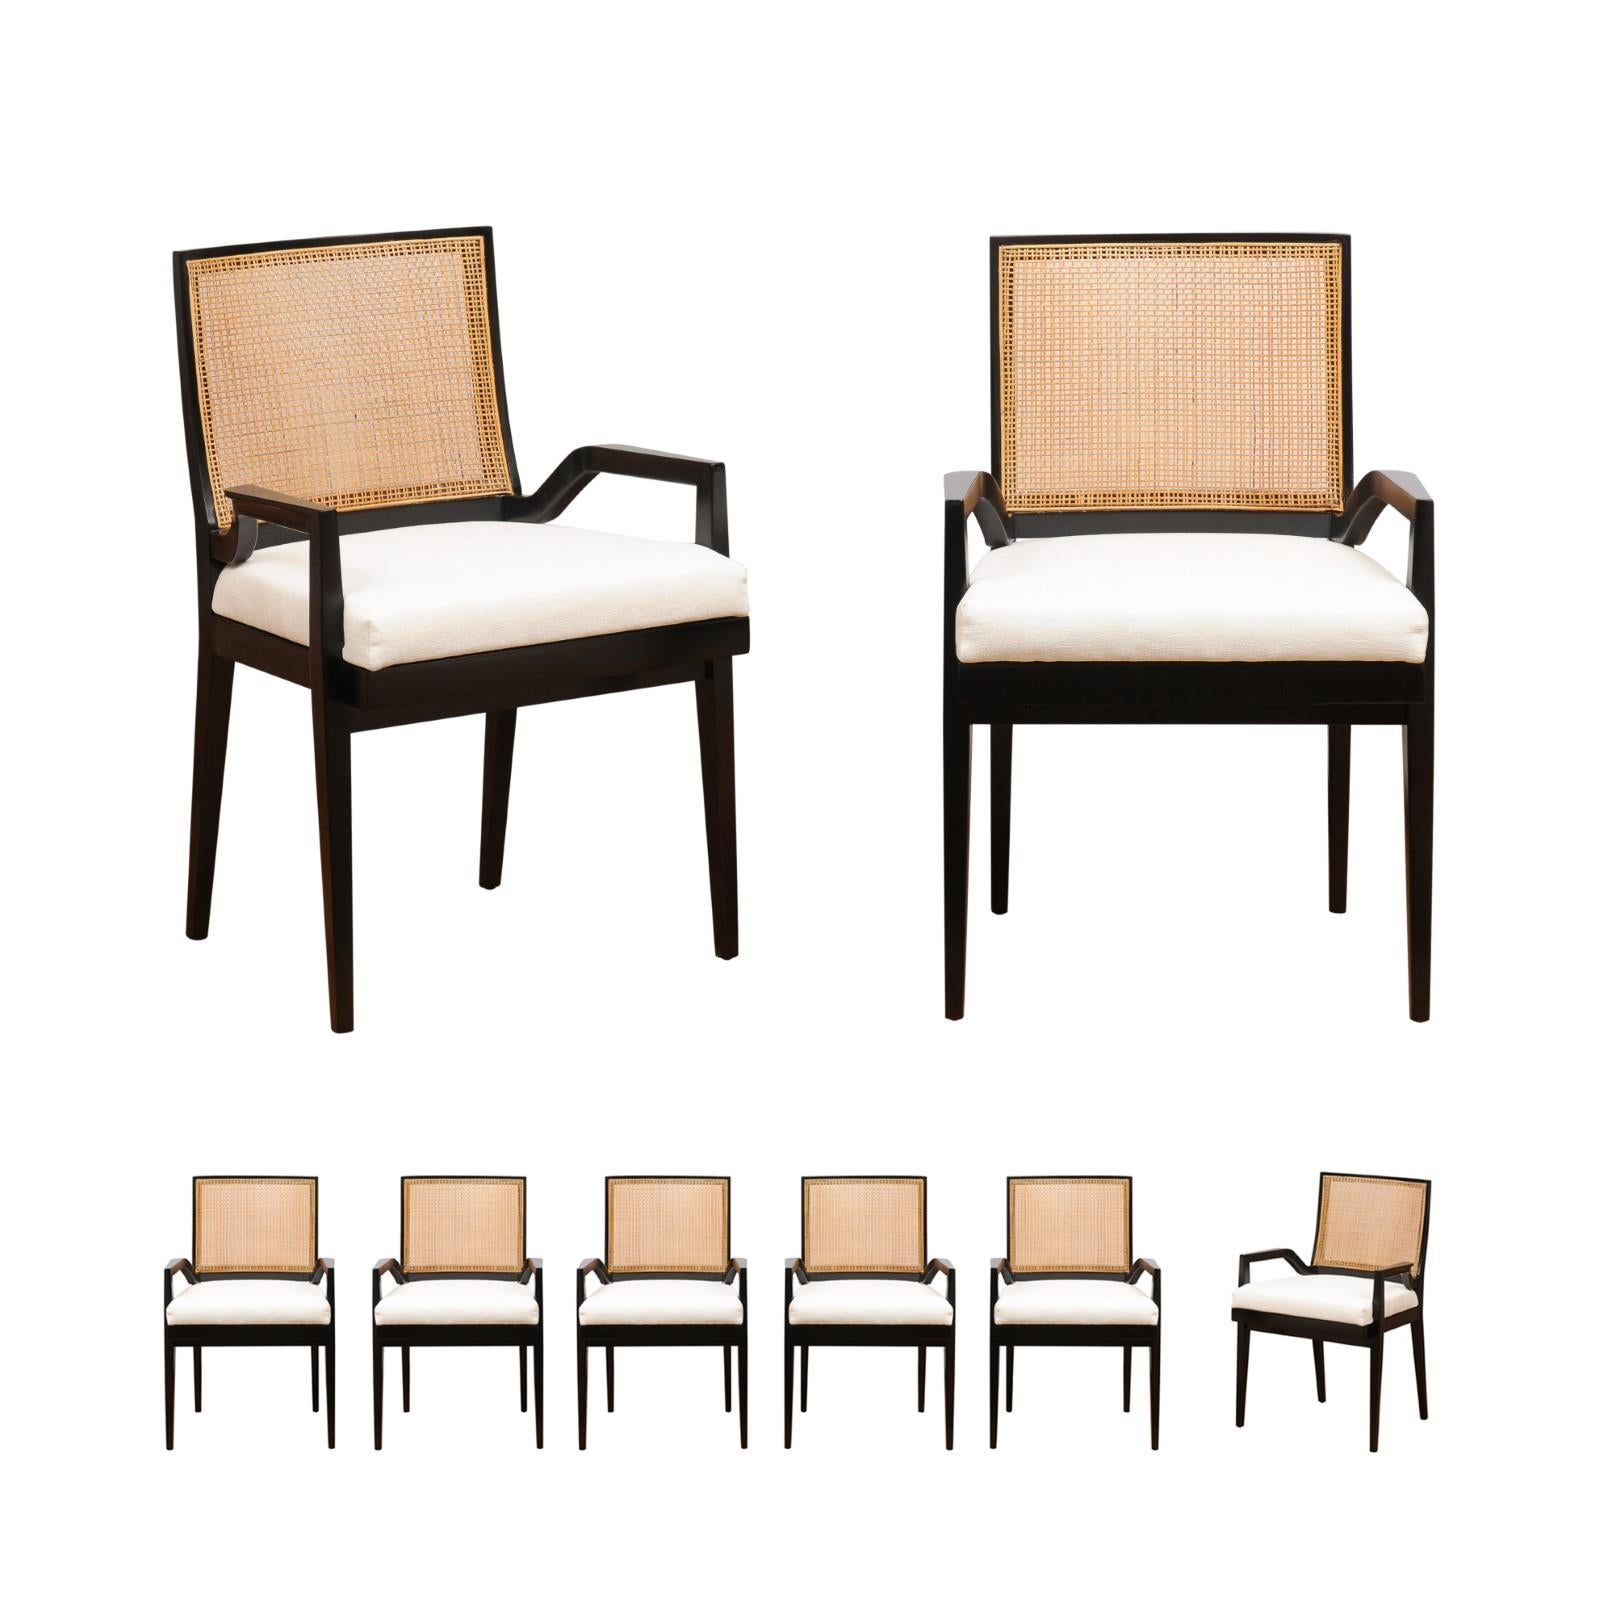 ALL ARMS Set of 8 Black Lacquer Cane Dining Chairs by Michael Taylor, circa 1960 For Sale 13